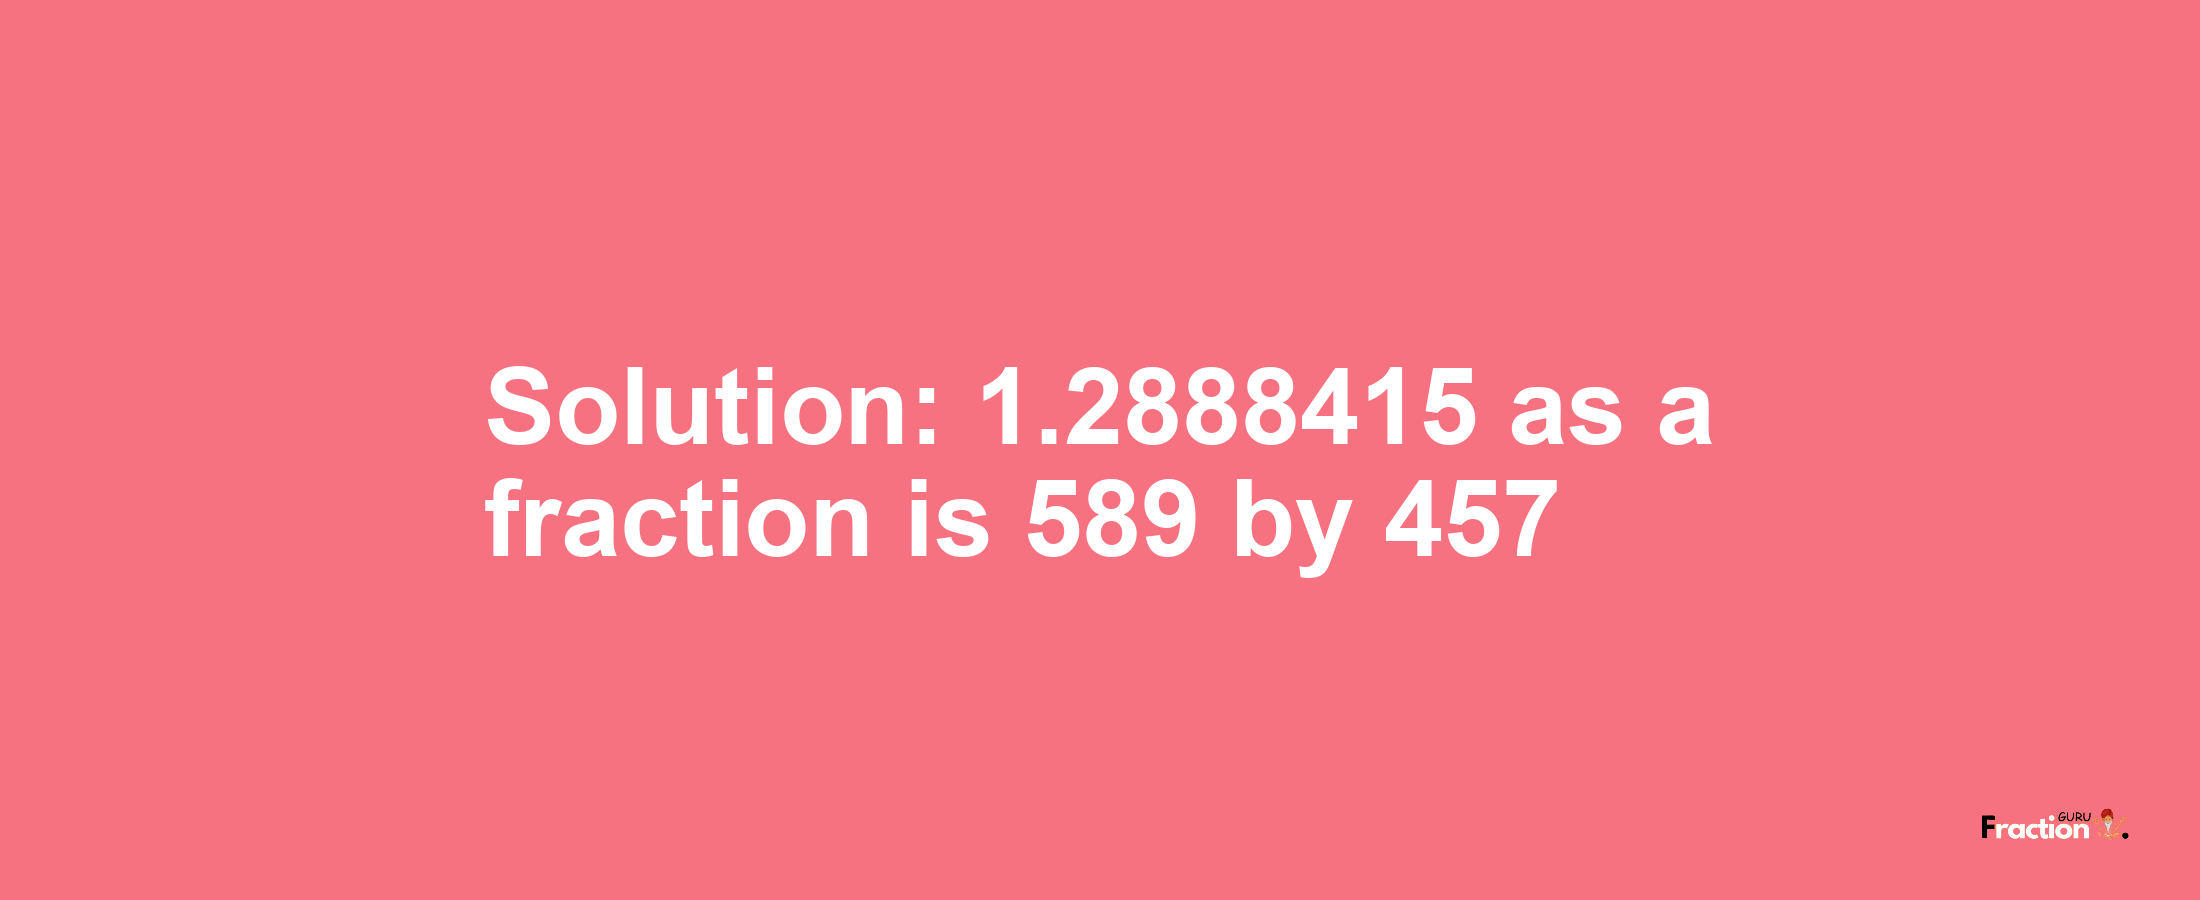 Solution:1.2888415 as a fraction is 589/457